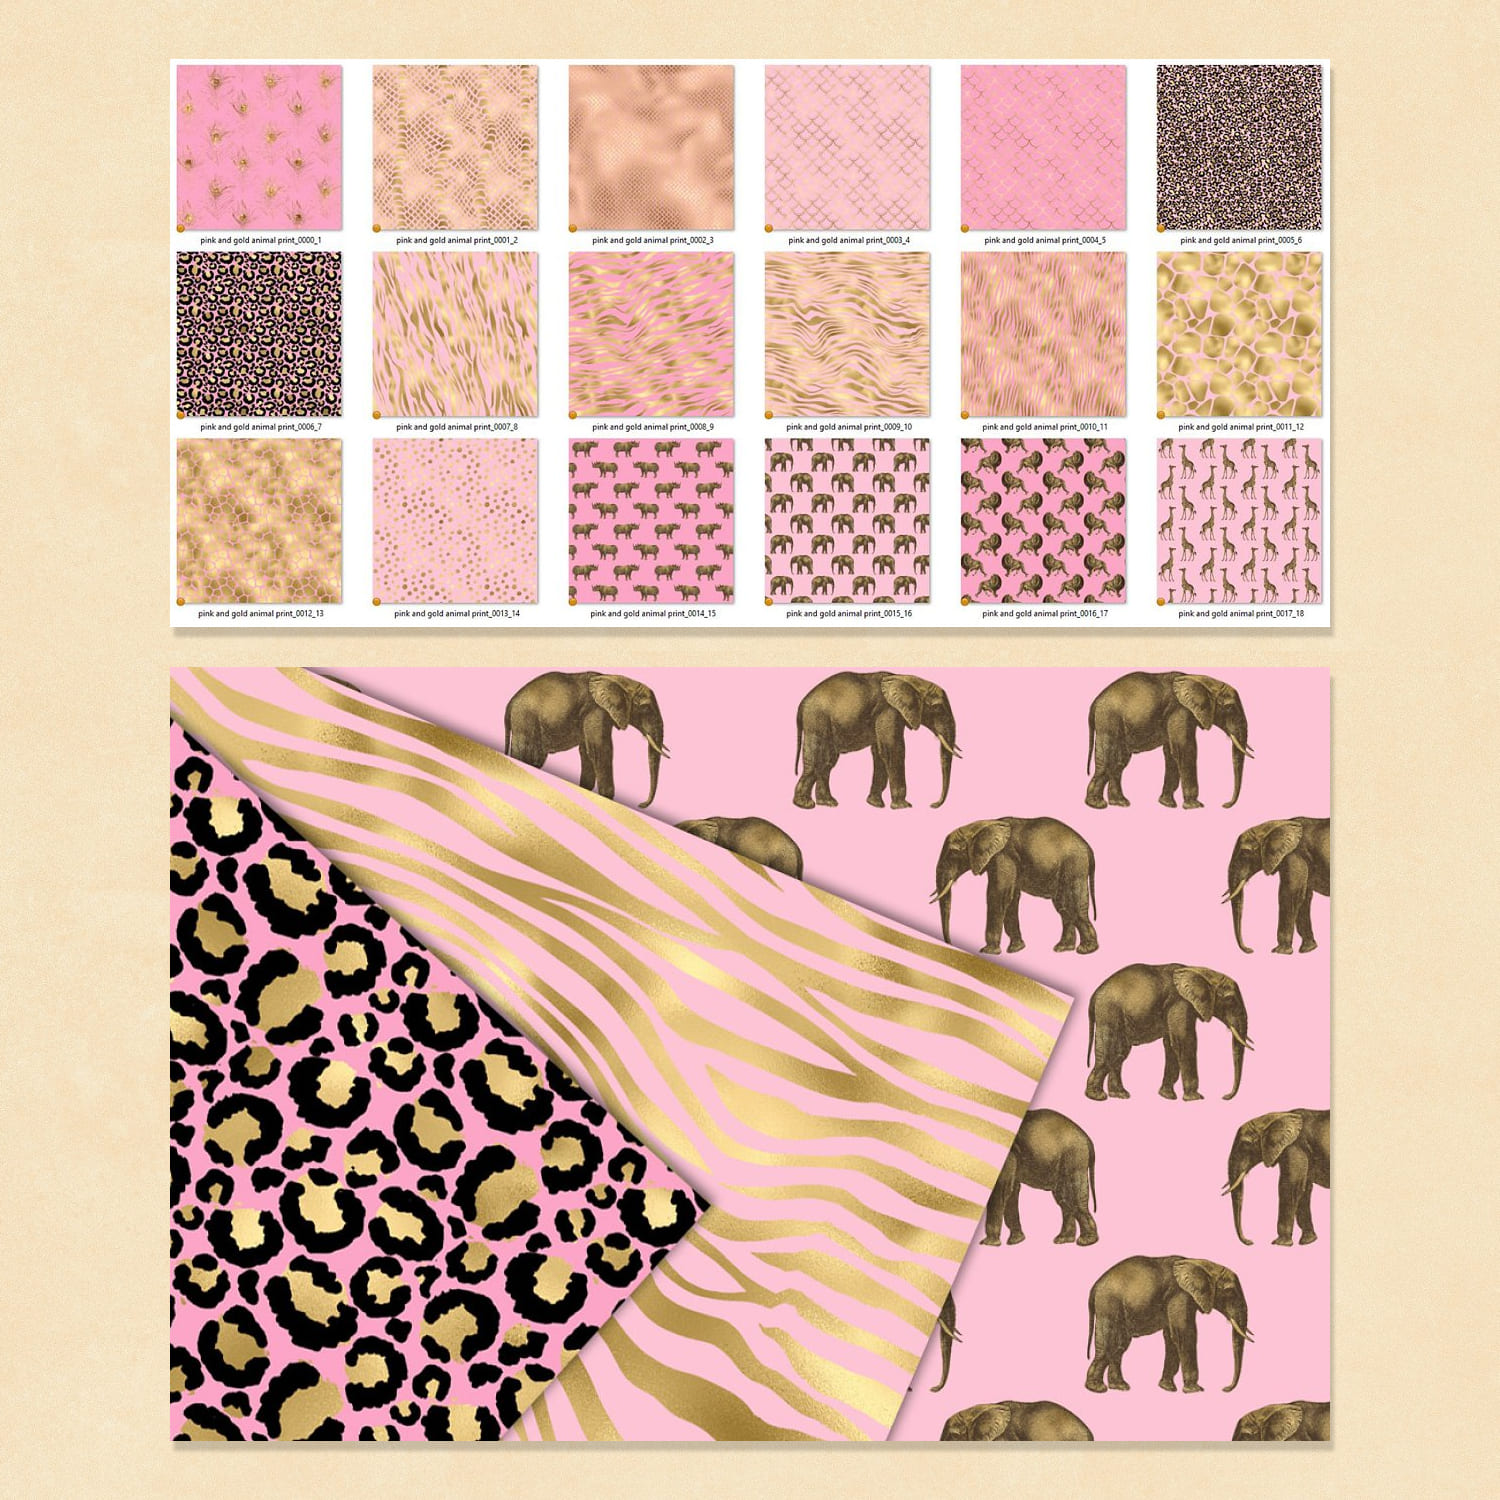 Pink and Gold Animal Skins cover image.